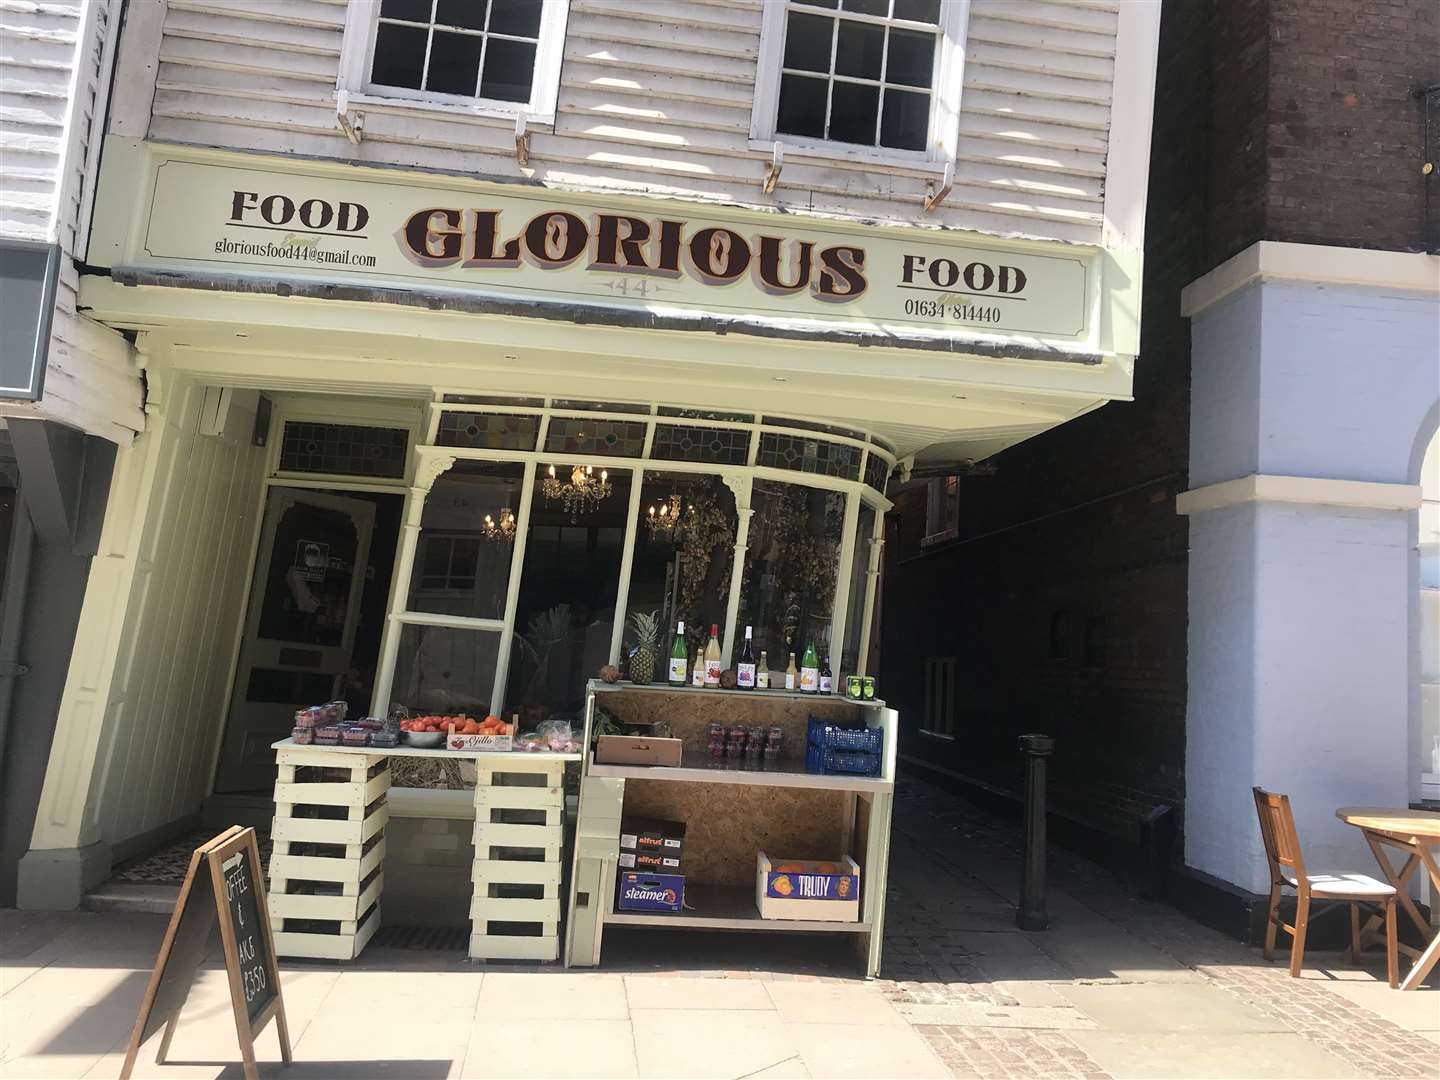 Food Glorious Food in Rochester is said to be haunted